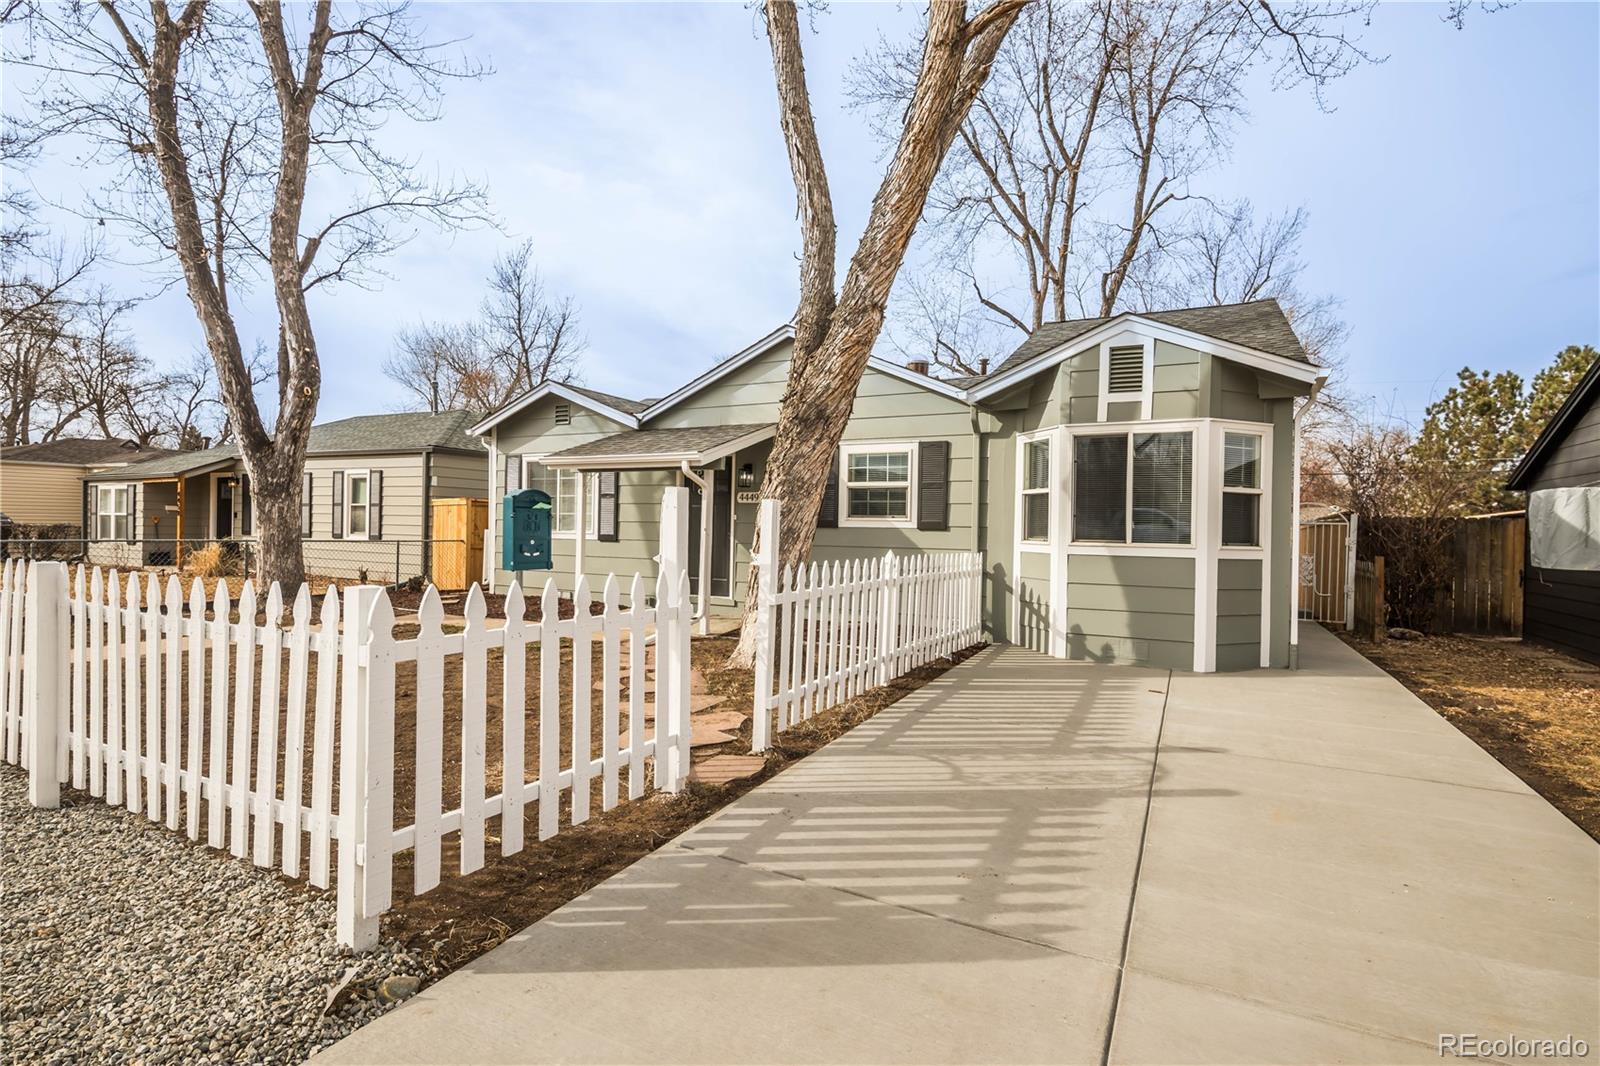 Report Image for 4449 S Pearl Street,Englewood, Colorado